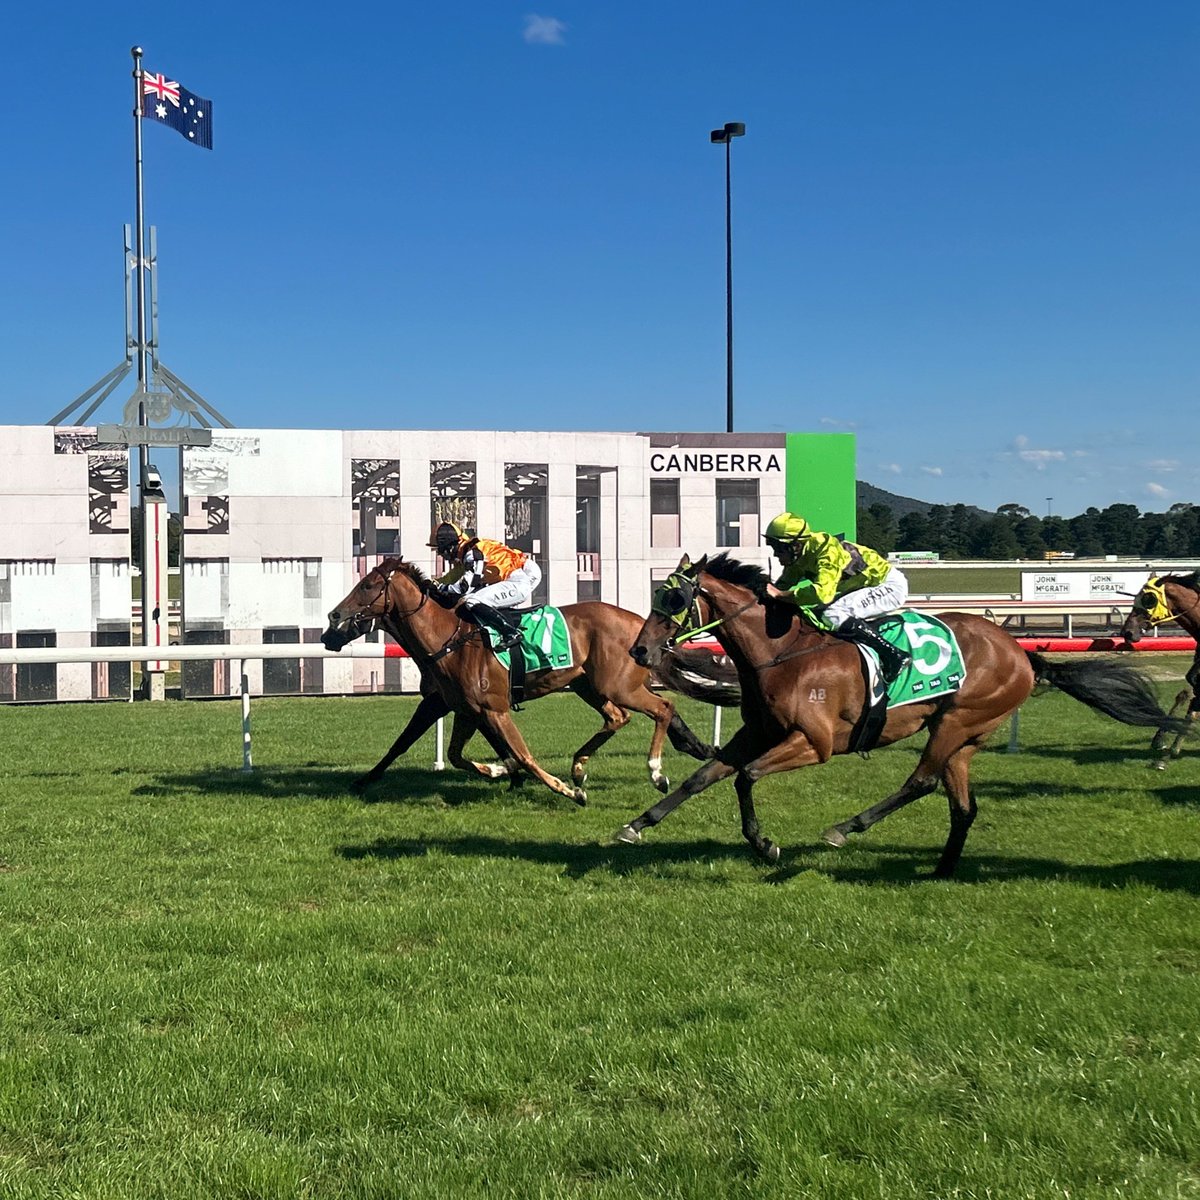 Rouge Lune digs deep to get the better of Dorami and a fast-finishing Bon Frankie in a thrilling @tabcomau Federal💪 The talented Natalie Jarvis (@thorotek) trained galloper registers career win number 4 from just 12 starts underneath Alysha Collett who now has a double 👏